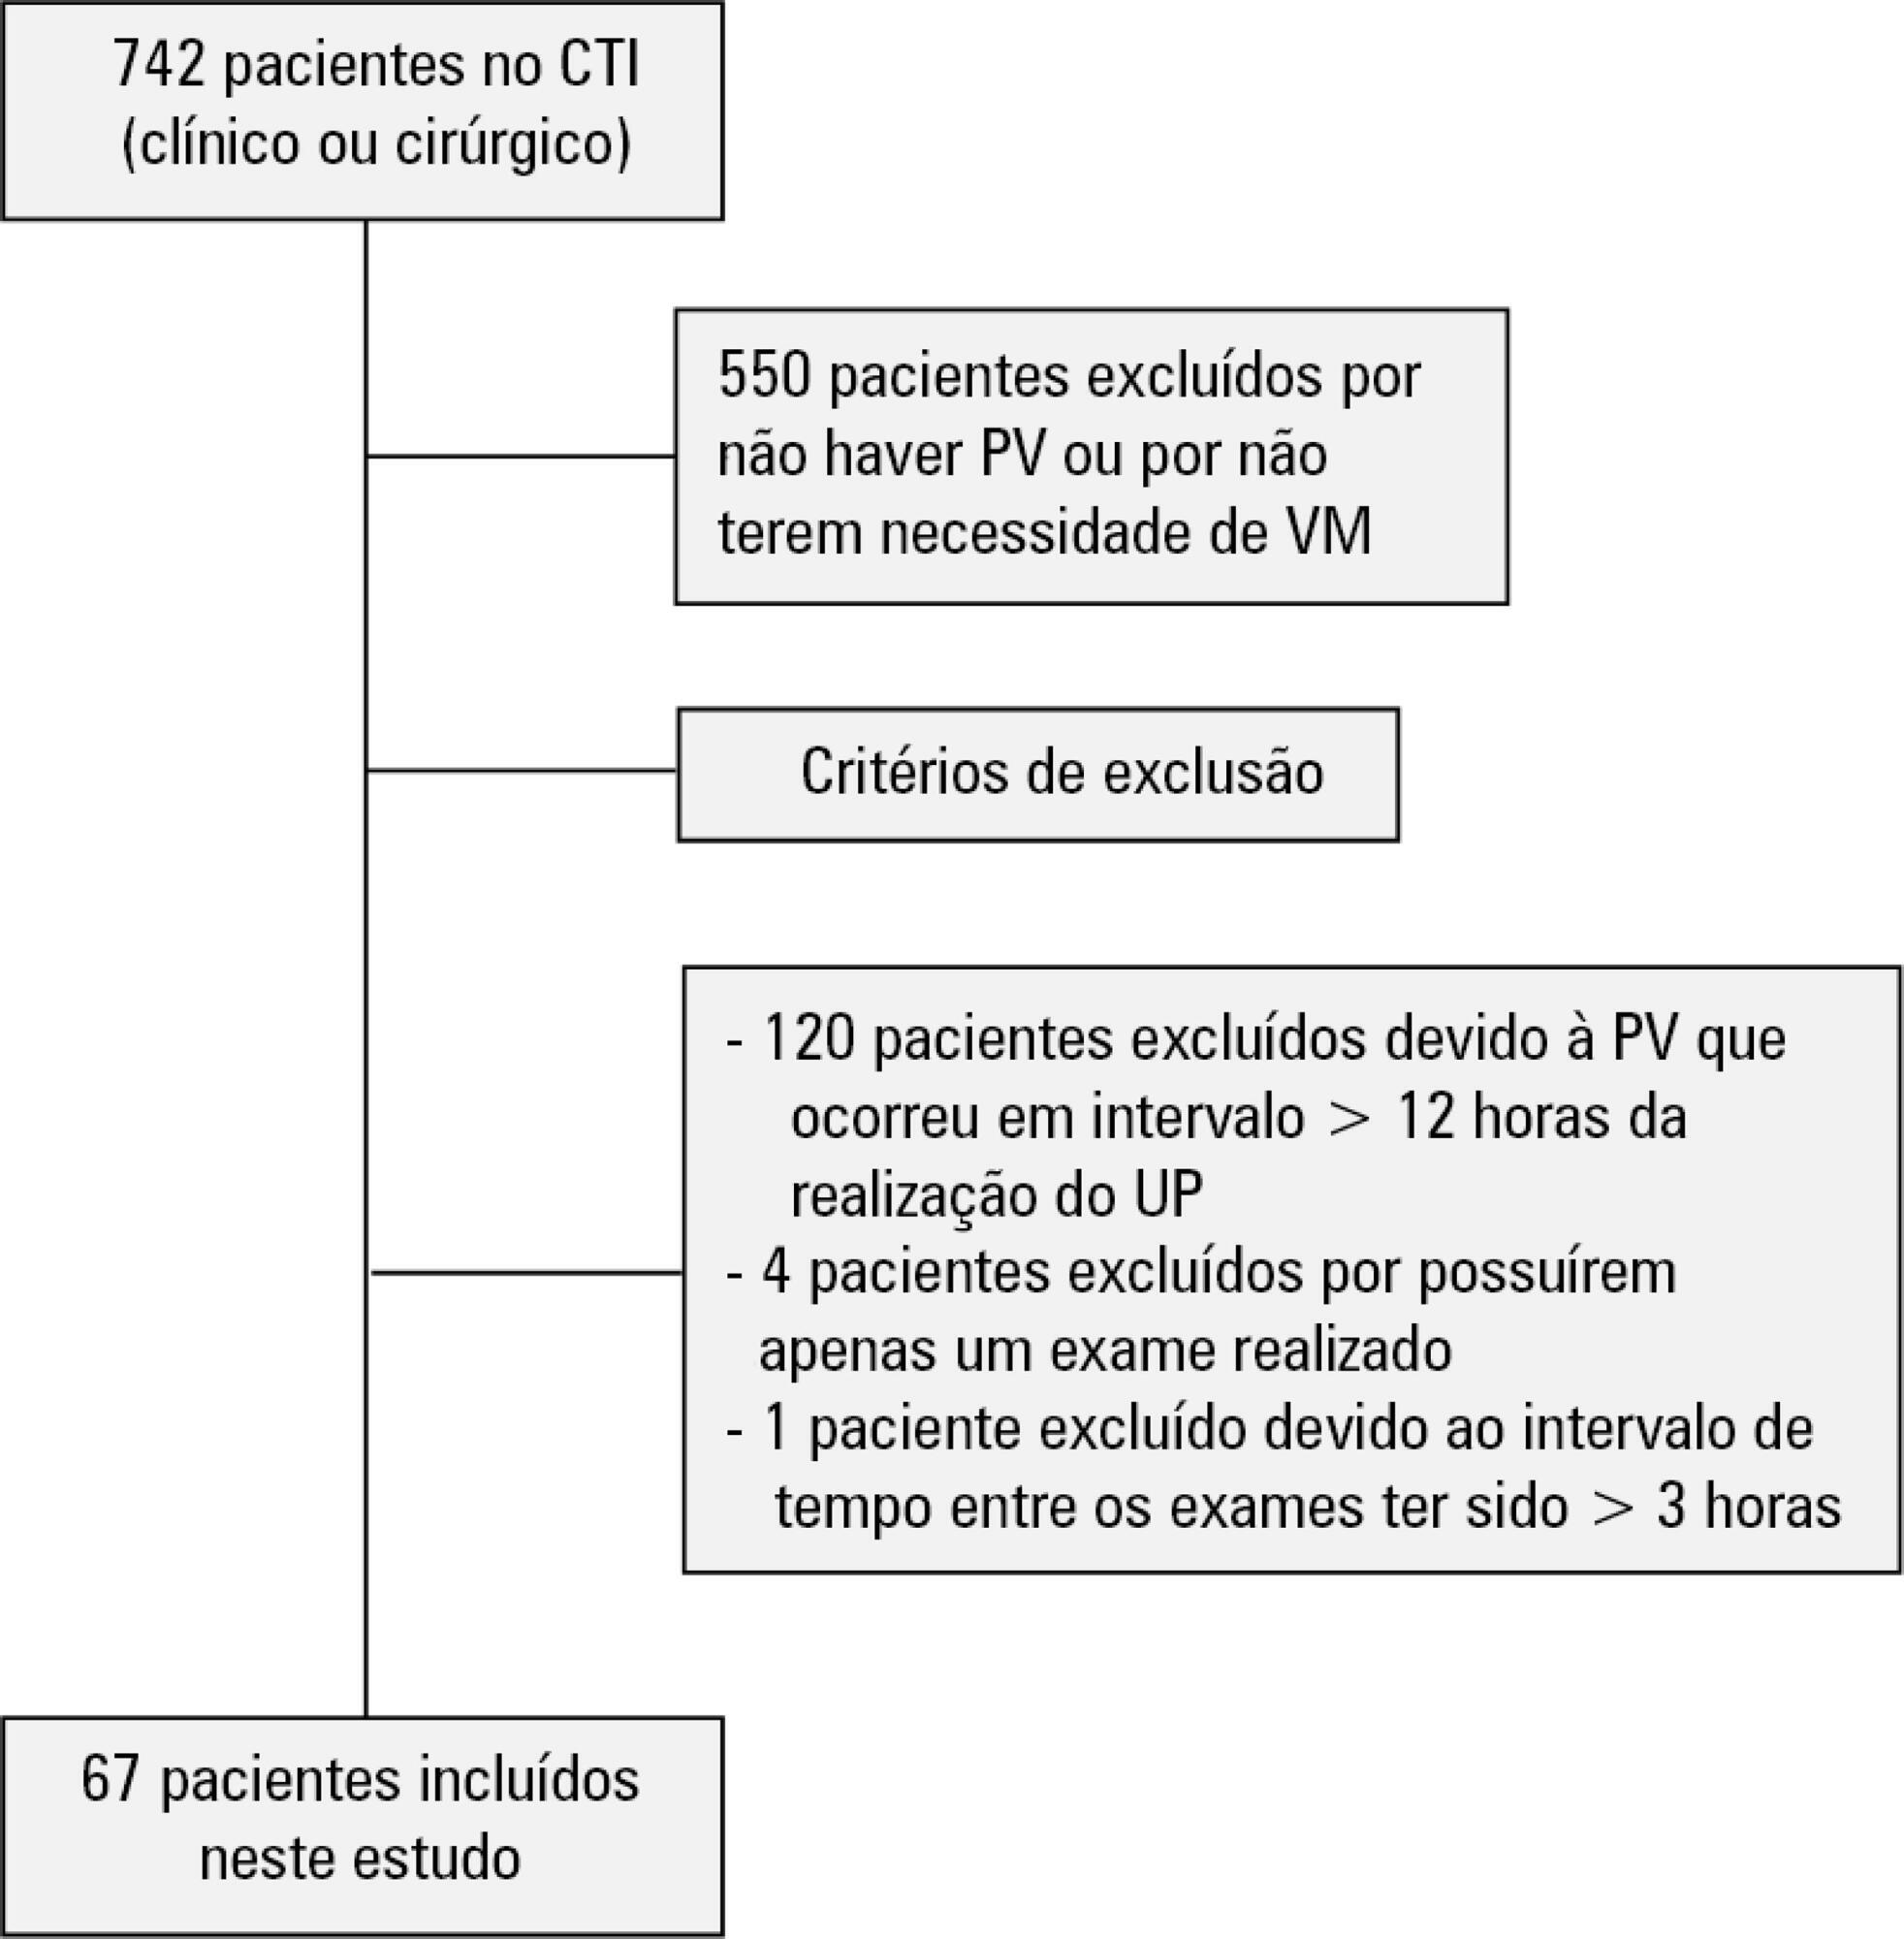 Evaluation of pulmonary B lines by different intensive care physicians using bedside ultrasonography: a reliability study